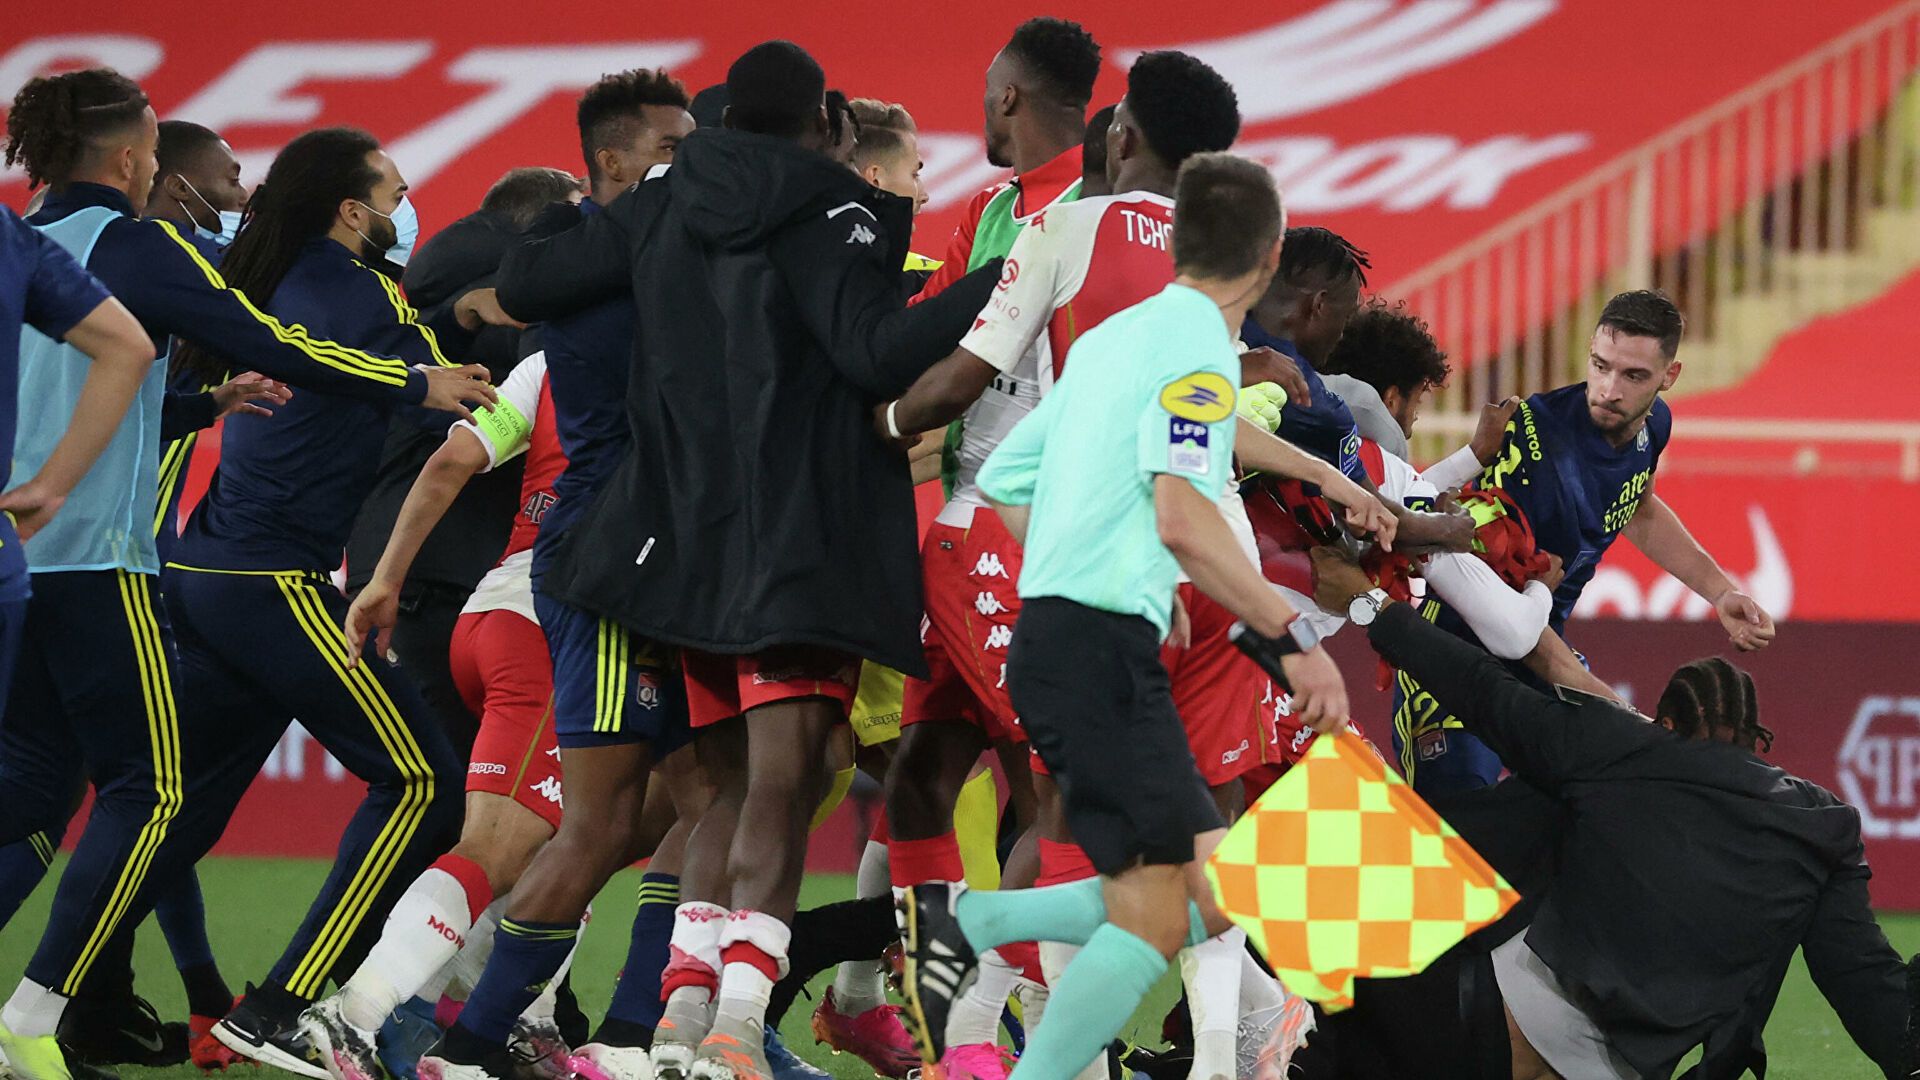 Monaco and Lyon players had a powerful fight after the match